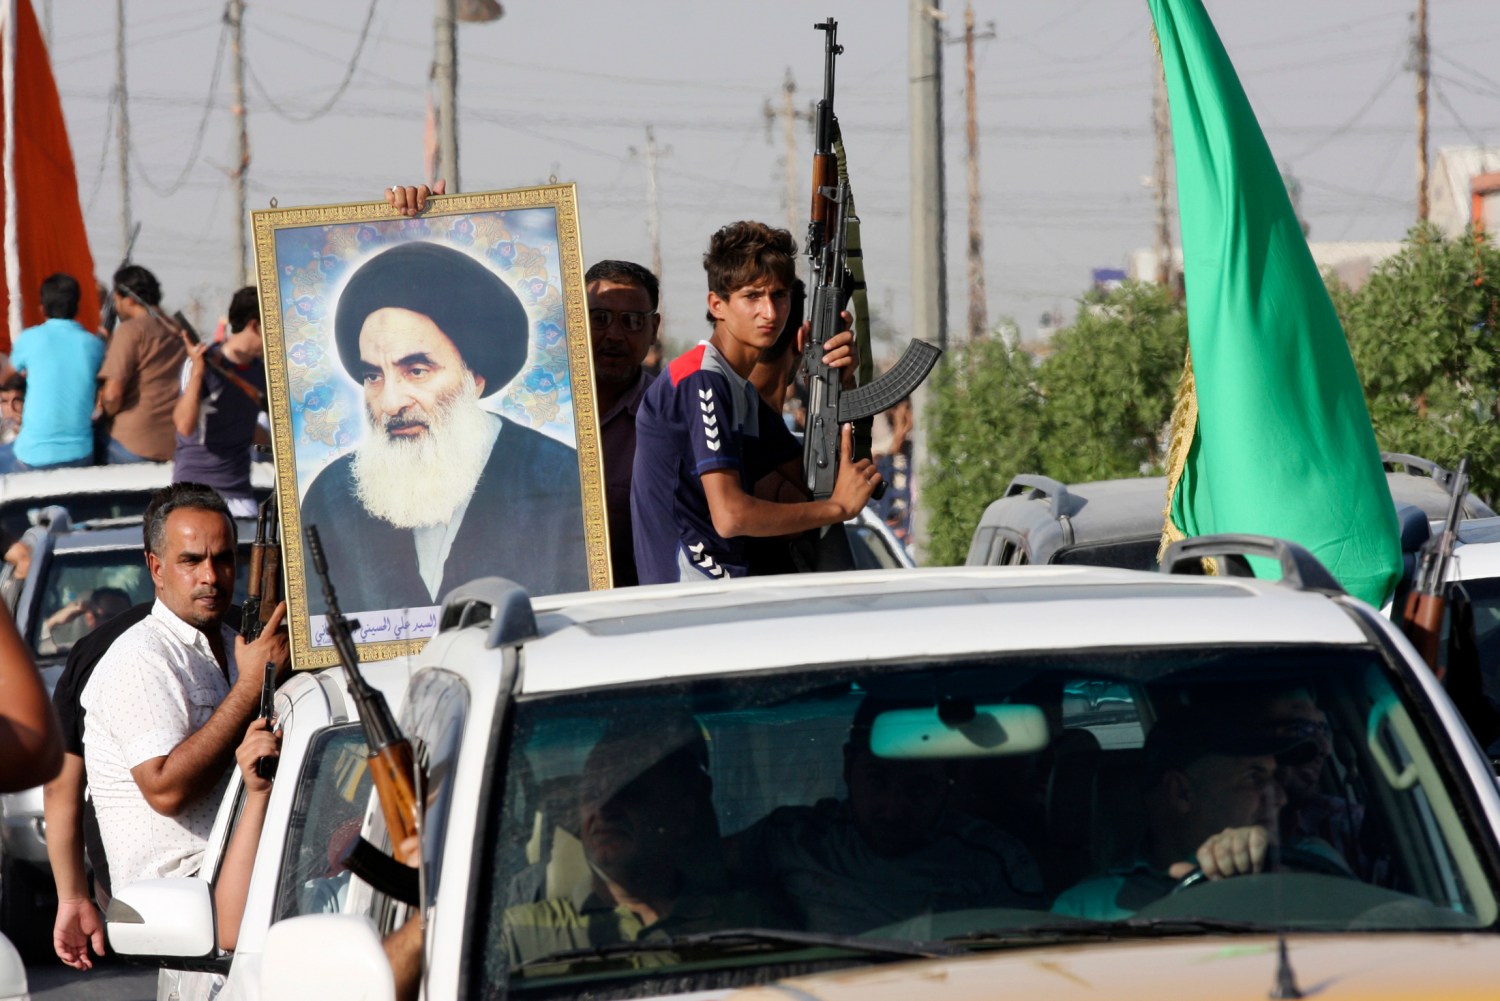 Volunteers, who have joined the Iraqi Army to fight against predominantly Sunni militants, carry weapons and a portrait of Grand Ayatollah Ali al-Sistani during a parade in the streets in Baghdad's Sadr city June 14, 2014. An offensive by insurgents that threatens to dismember Iraq seemed to slow on Saturday after days of lightning advances as government forces regained some territory in counter-attacks, easing pressure on the Shi'ite-led government in Baghdad. REUTERS/Wissm al-Okili